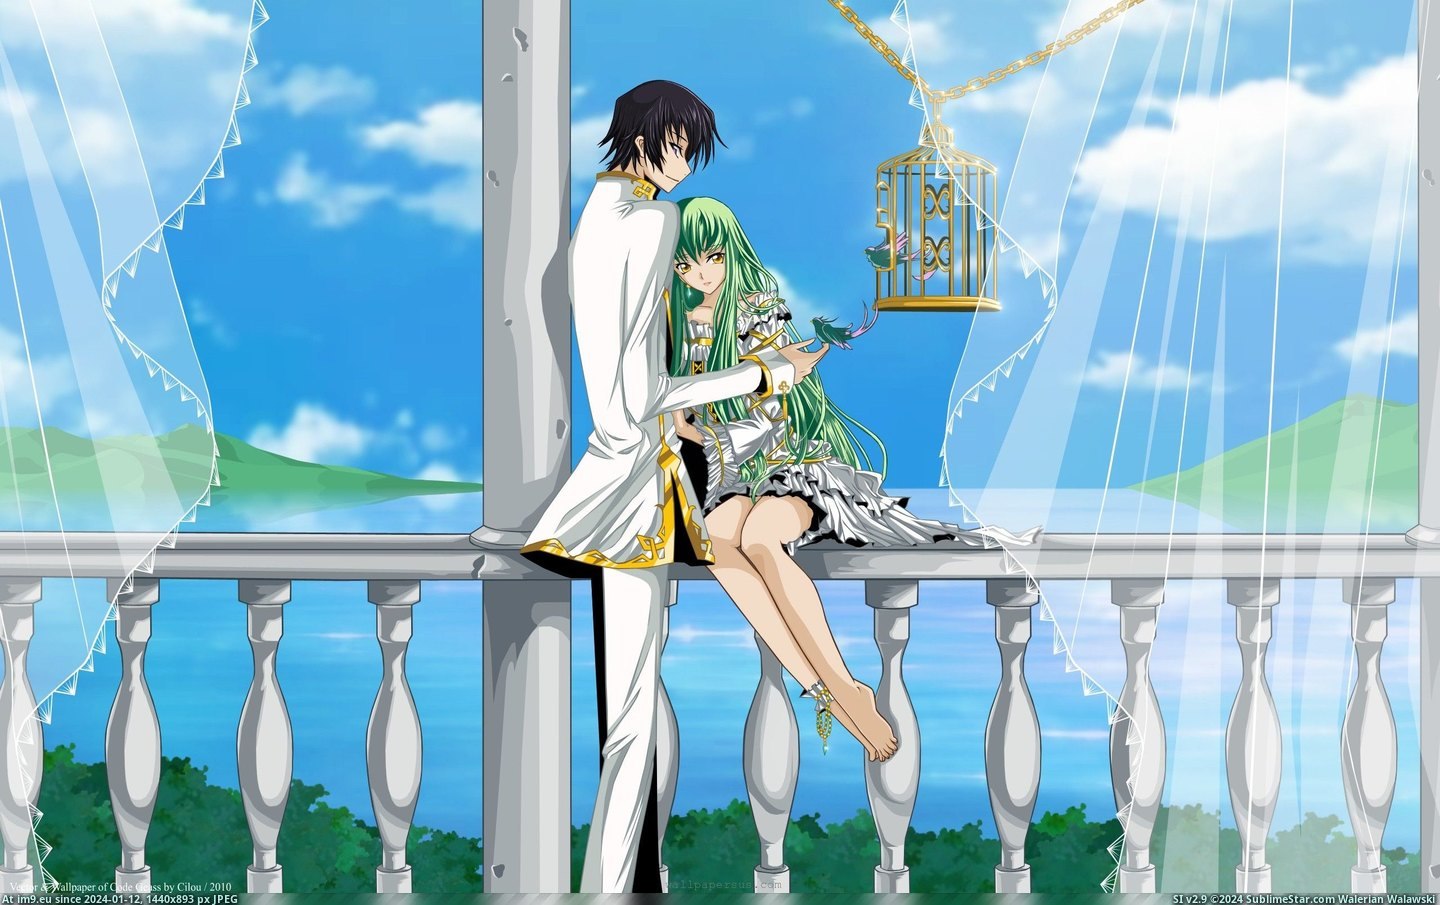 Code Geass Anime Boy Couple Cute Girl Love (HD) (in HD Wallpapers - anime, games and abstract art/3D backgrounds)